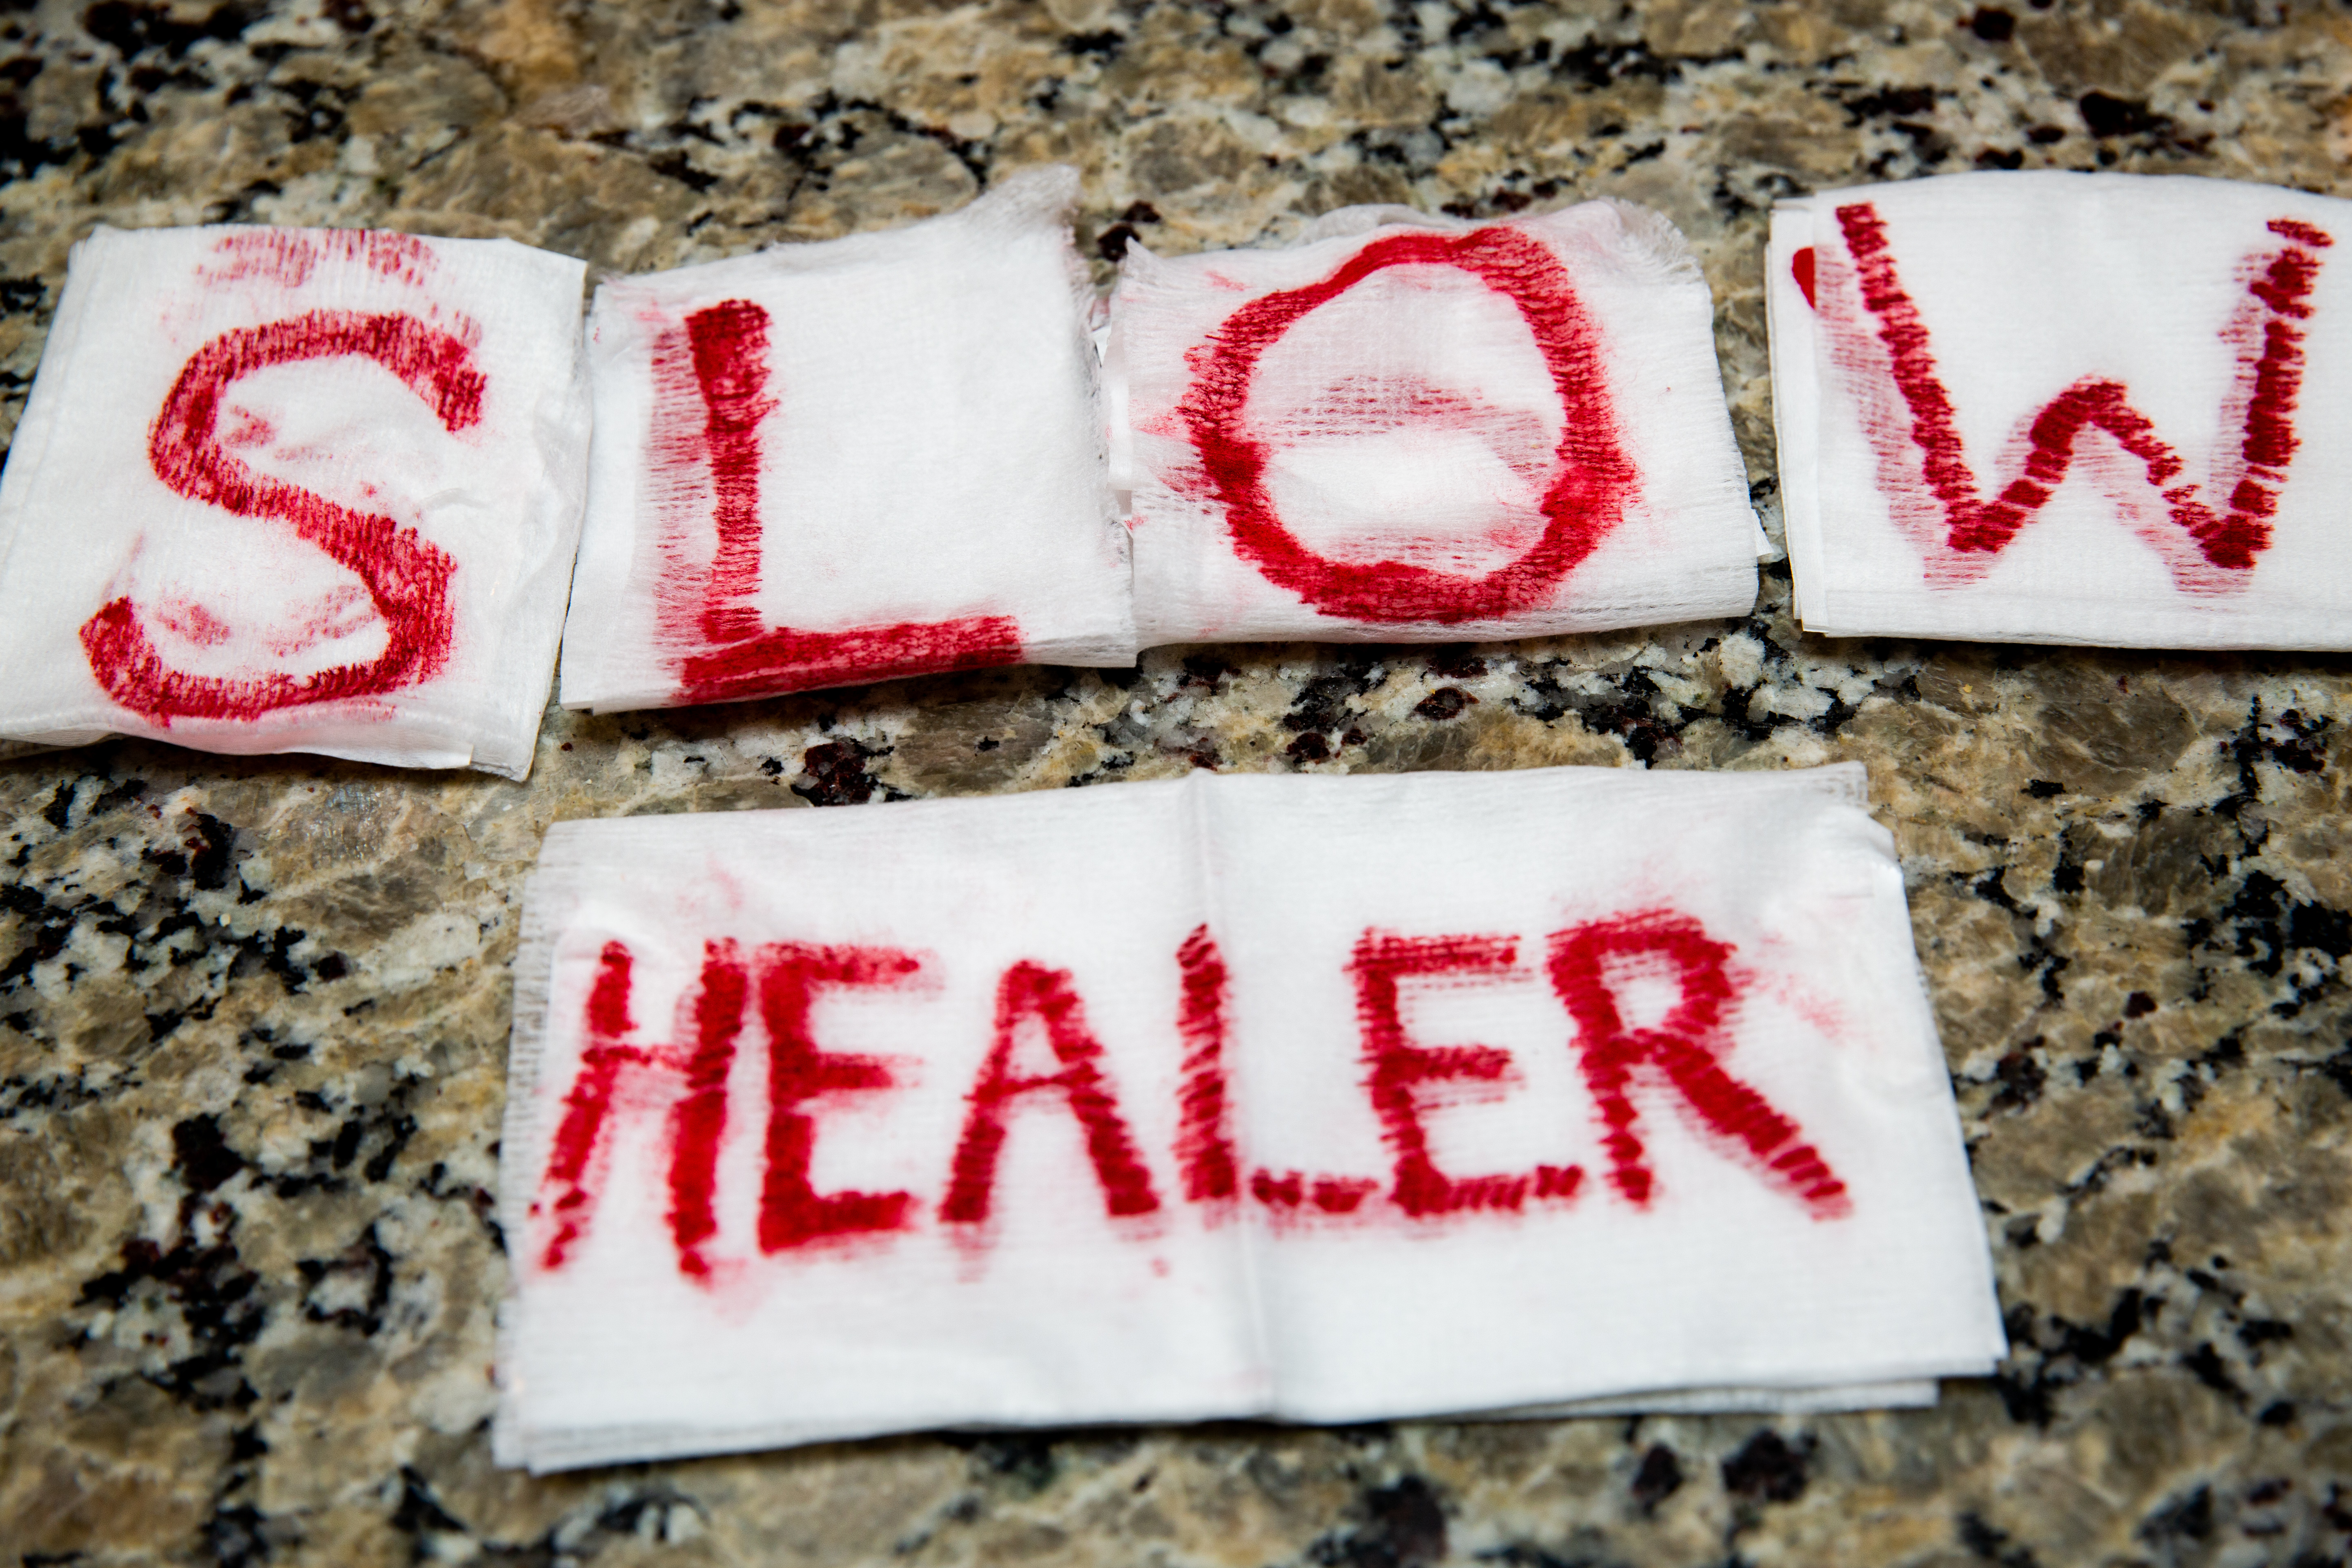 On 6 different white gauze bandages are written the letters for the words "slow healing," in what looks like blood. 